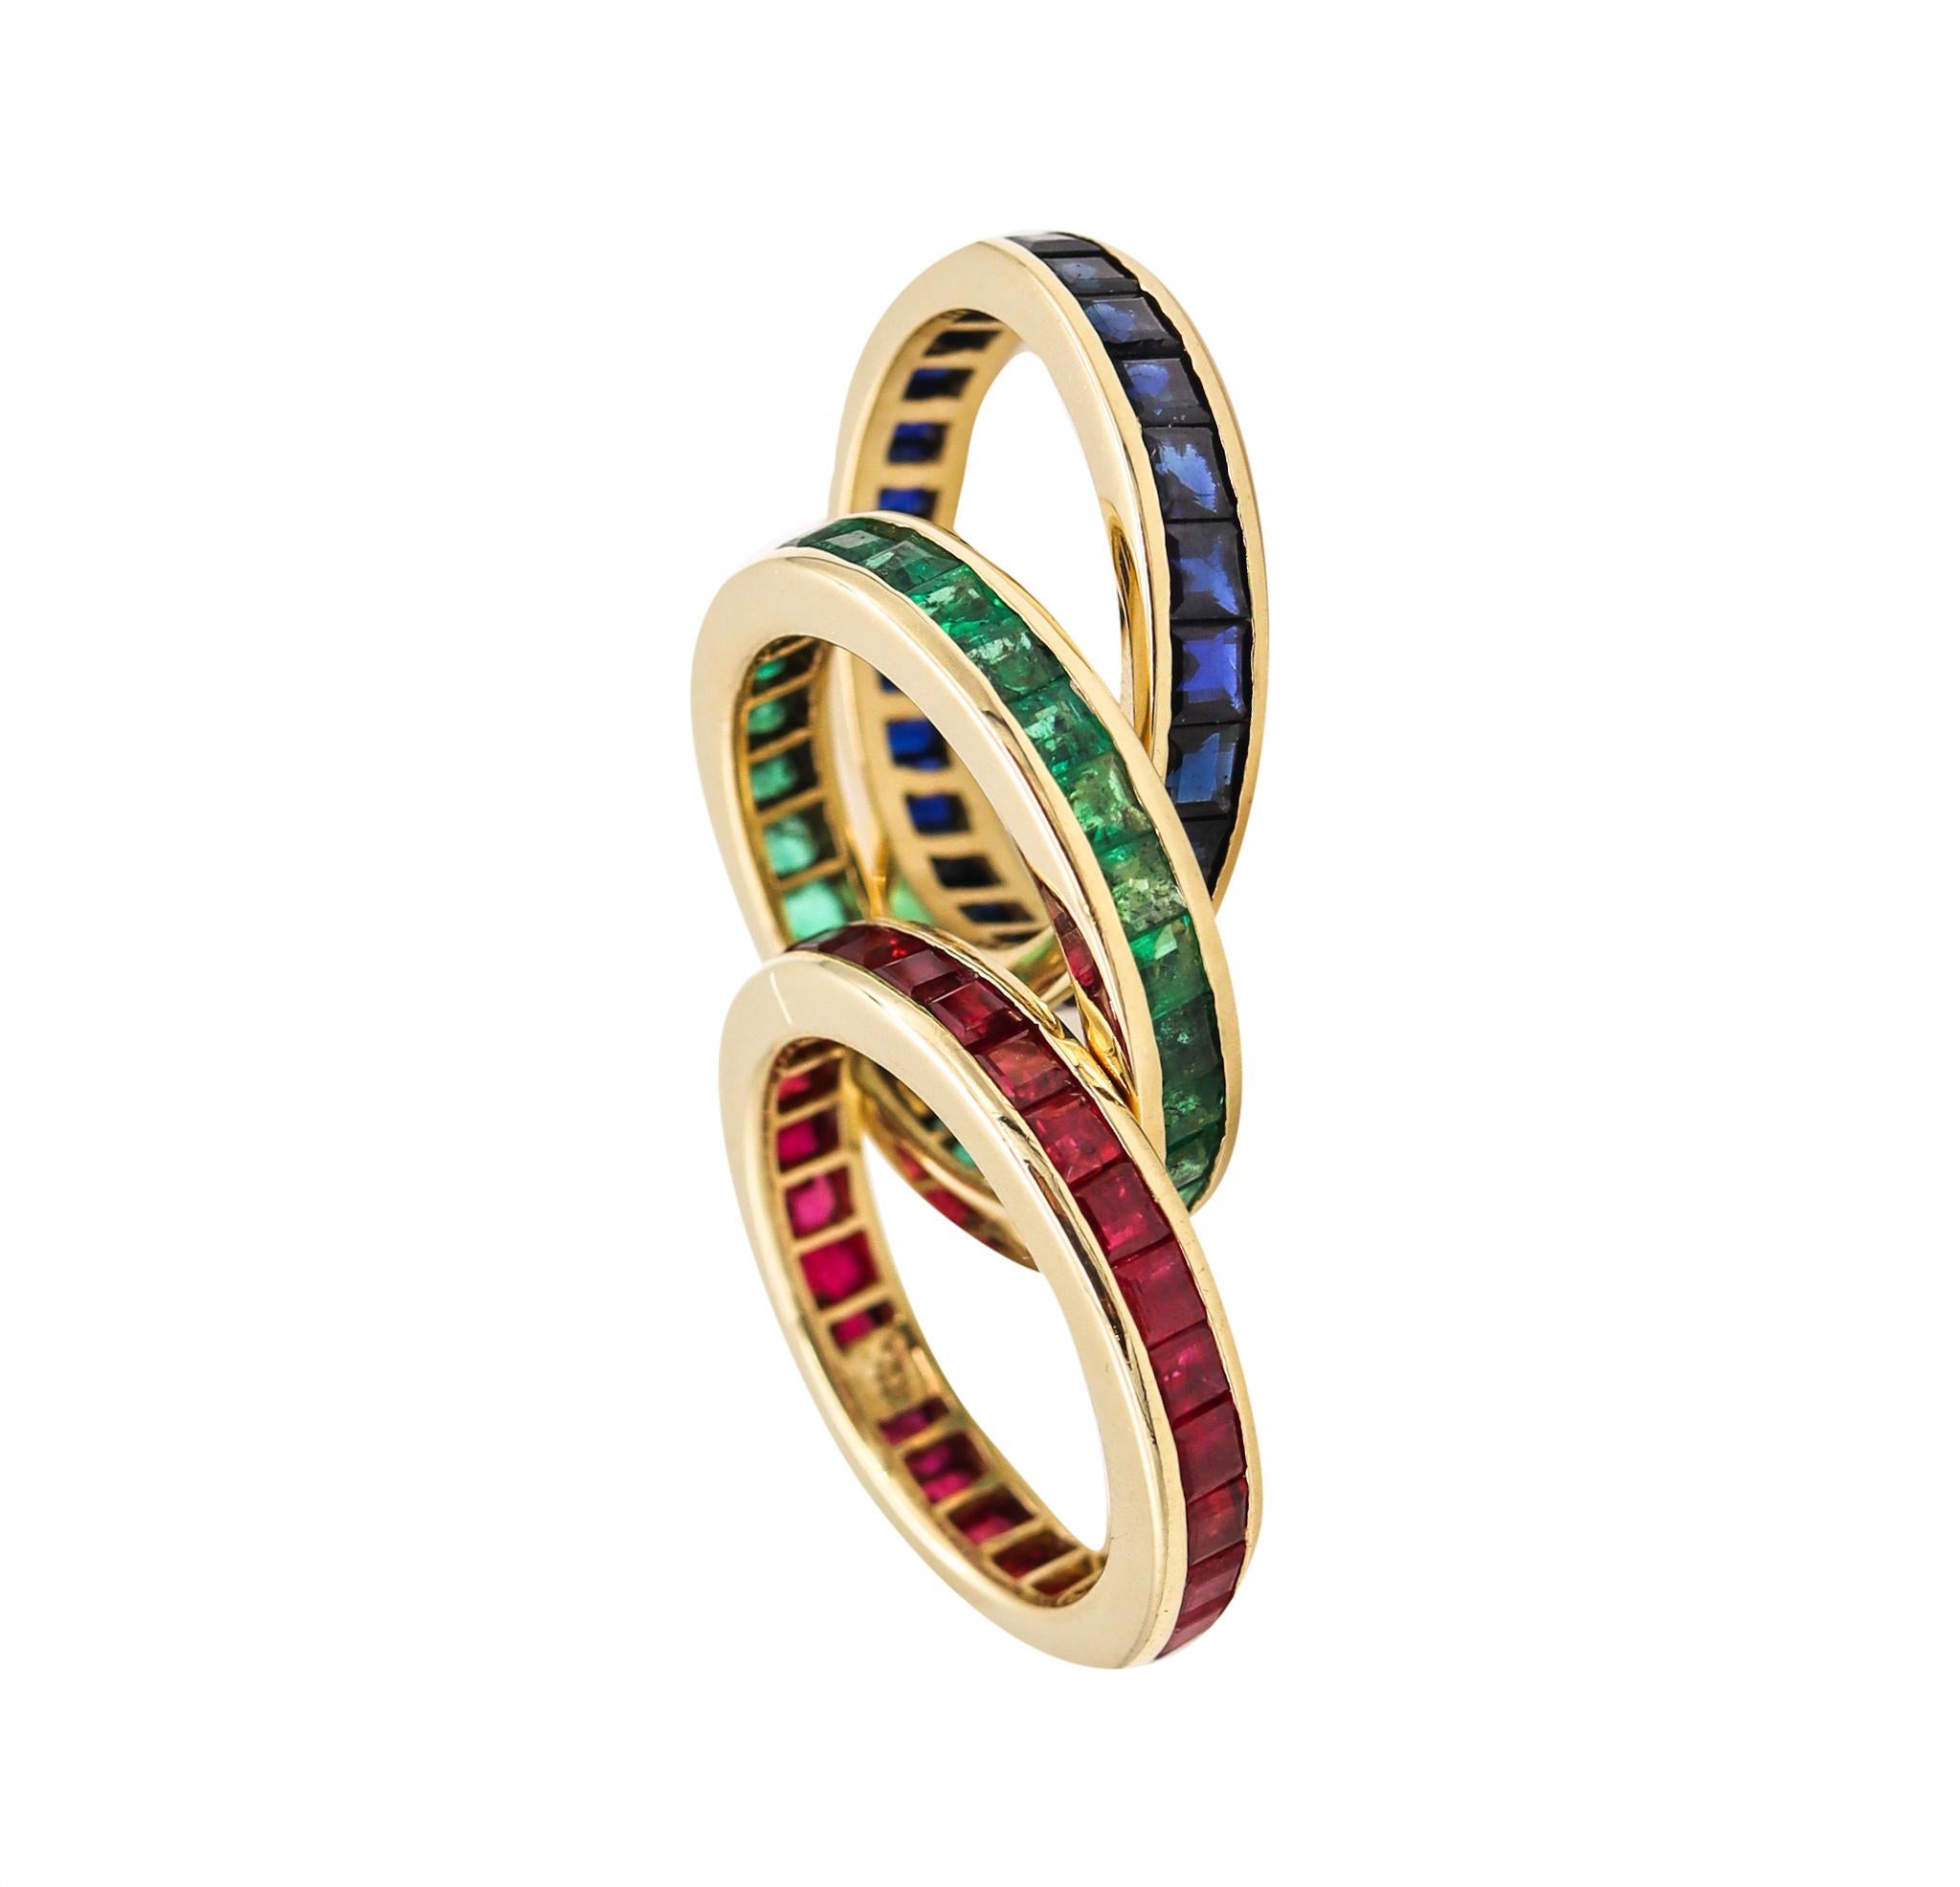 A suite of three eternity bands with gemstones.

Beautiful matching trio of eternity bands rings, crafted in solid yellow gold of 14 karats, with high polished finish. They are channel-set with 89 calibrated square faceted cut of natural colorful